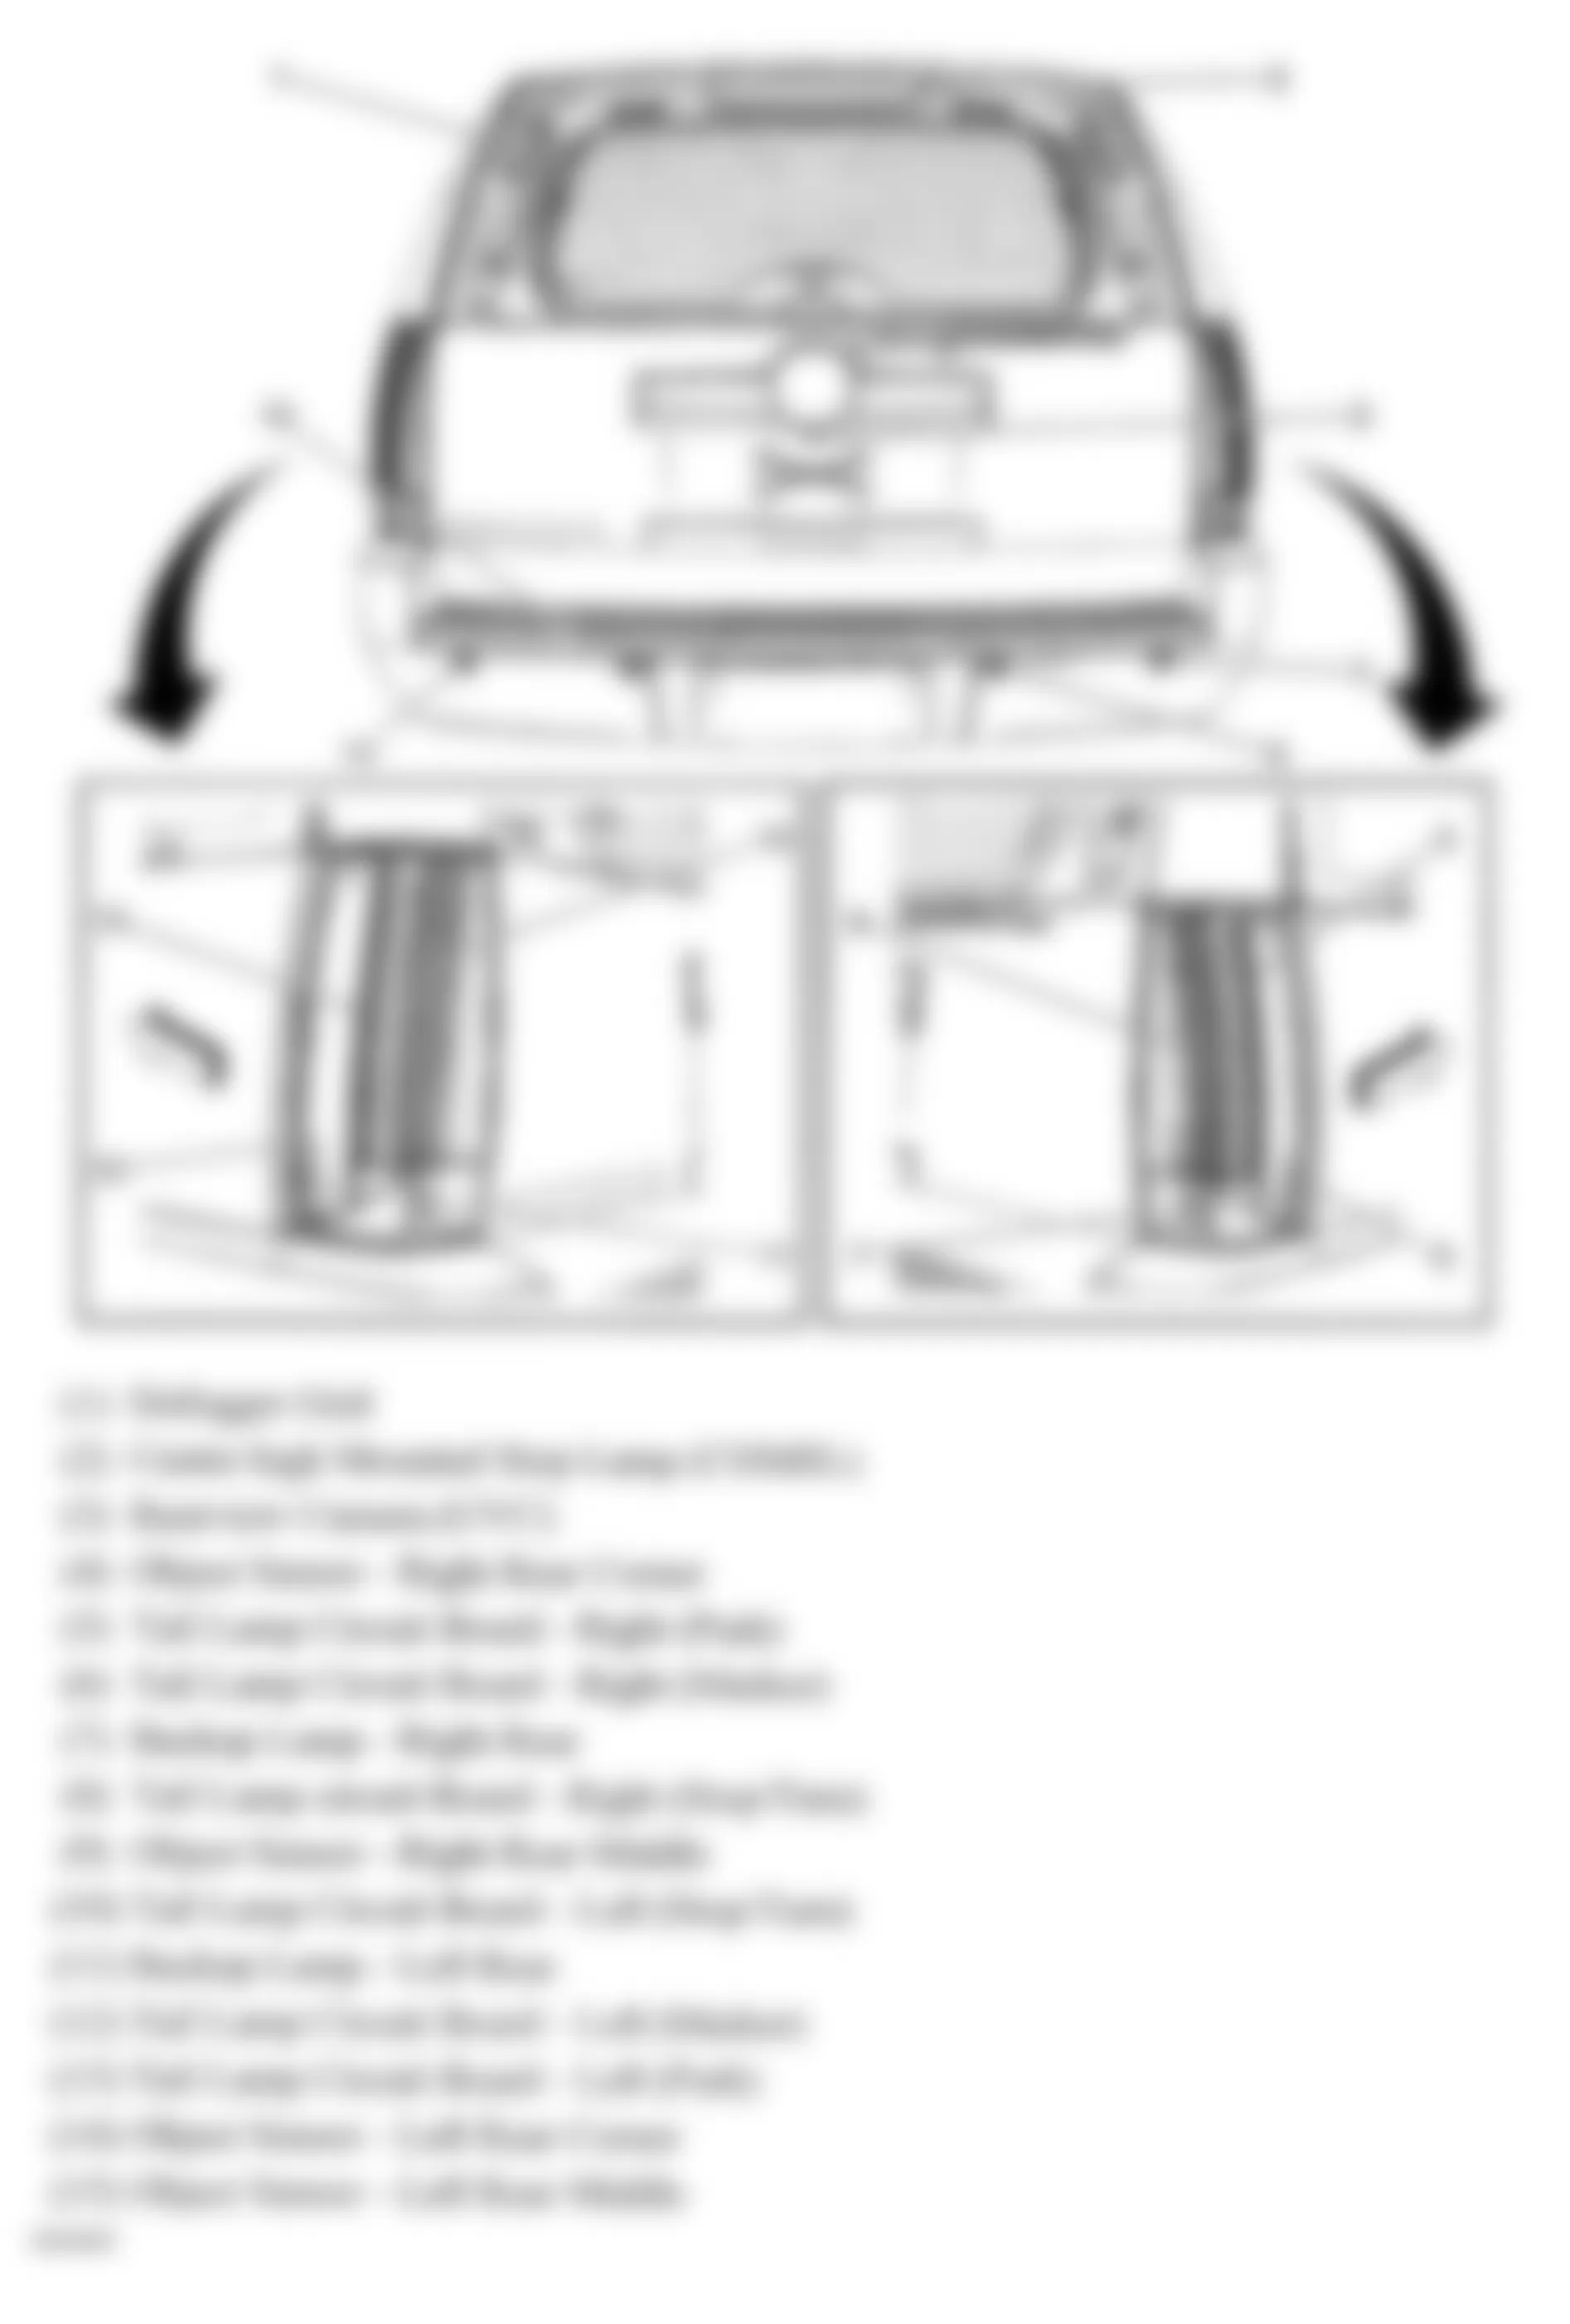 Chevrolet Suburban C1500 2009 - Component Locations -  Rear Of Vehicle (Tahoe & Escalade W/One Piece Liftgate)